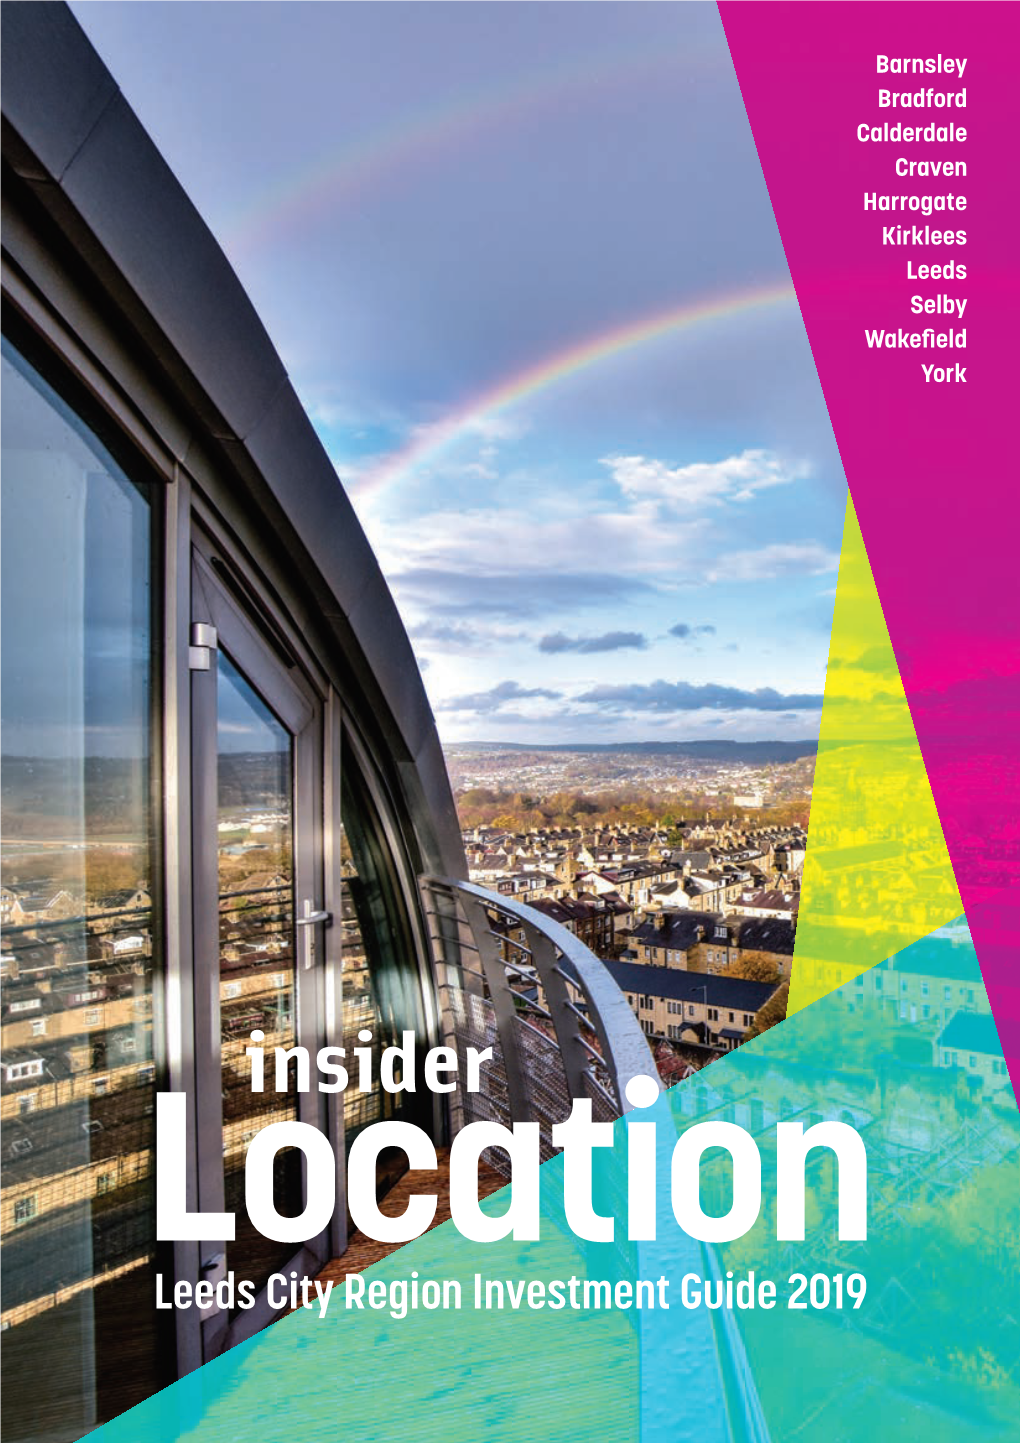 Leeds City Region Investment Guide 2019